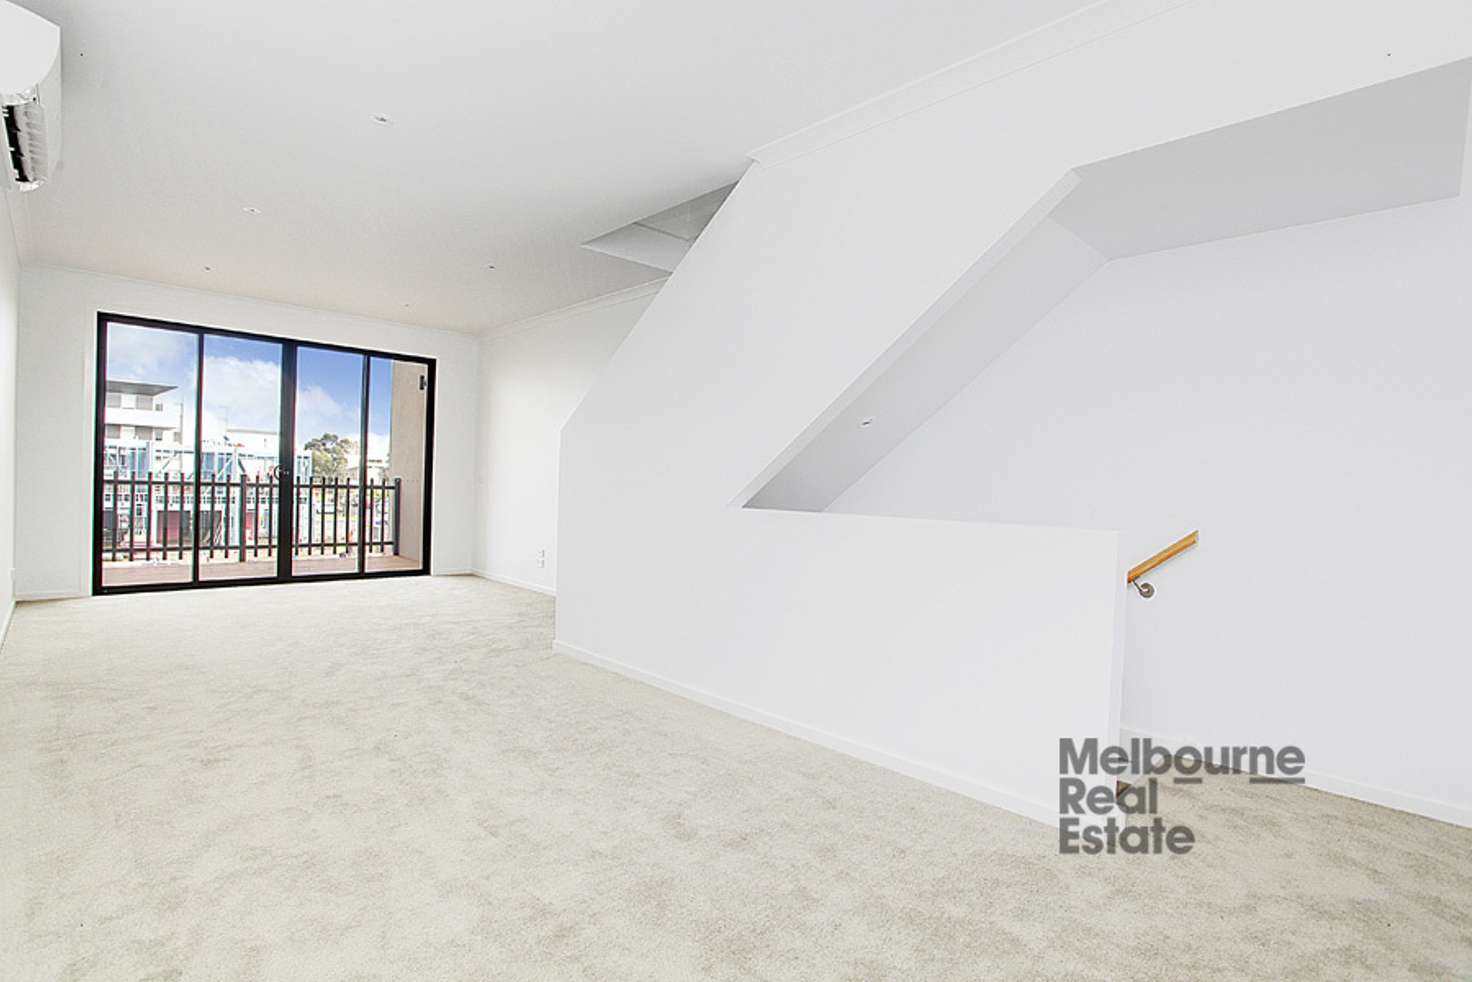 Main view of Homely apartment listing, 18 Kiln Walk, Maidstone VIC 3012